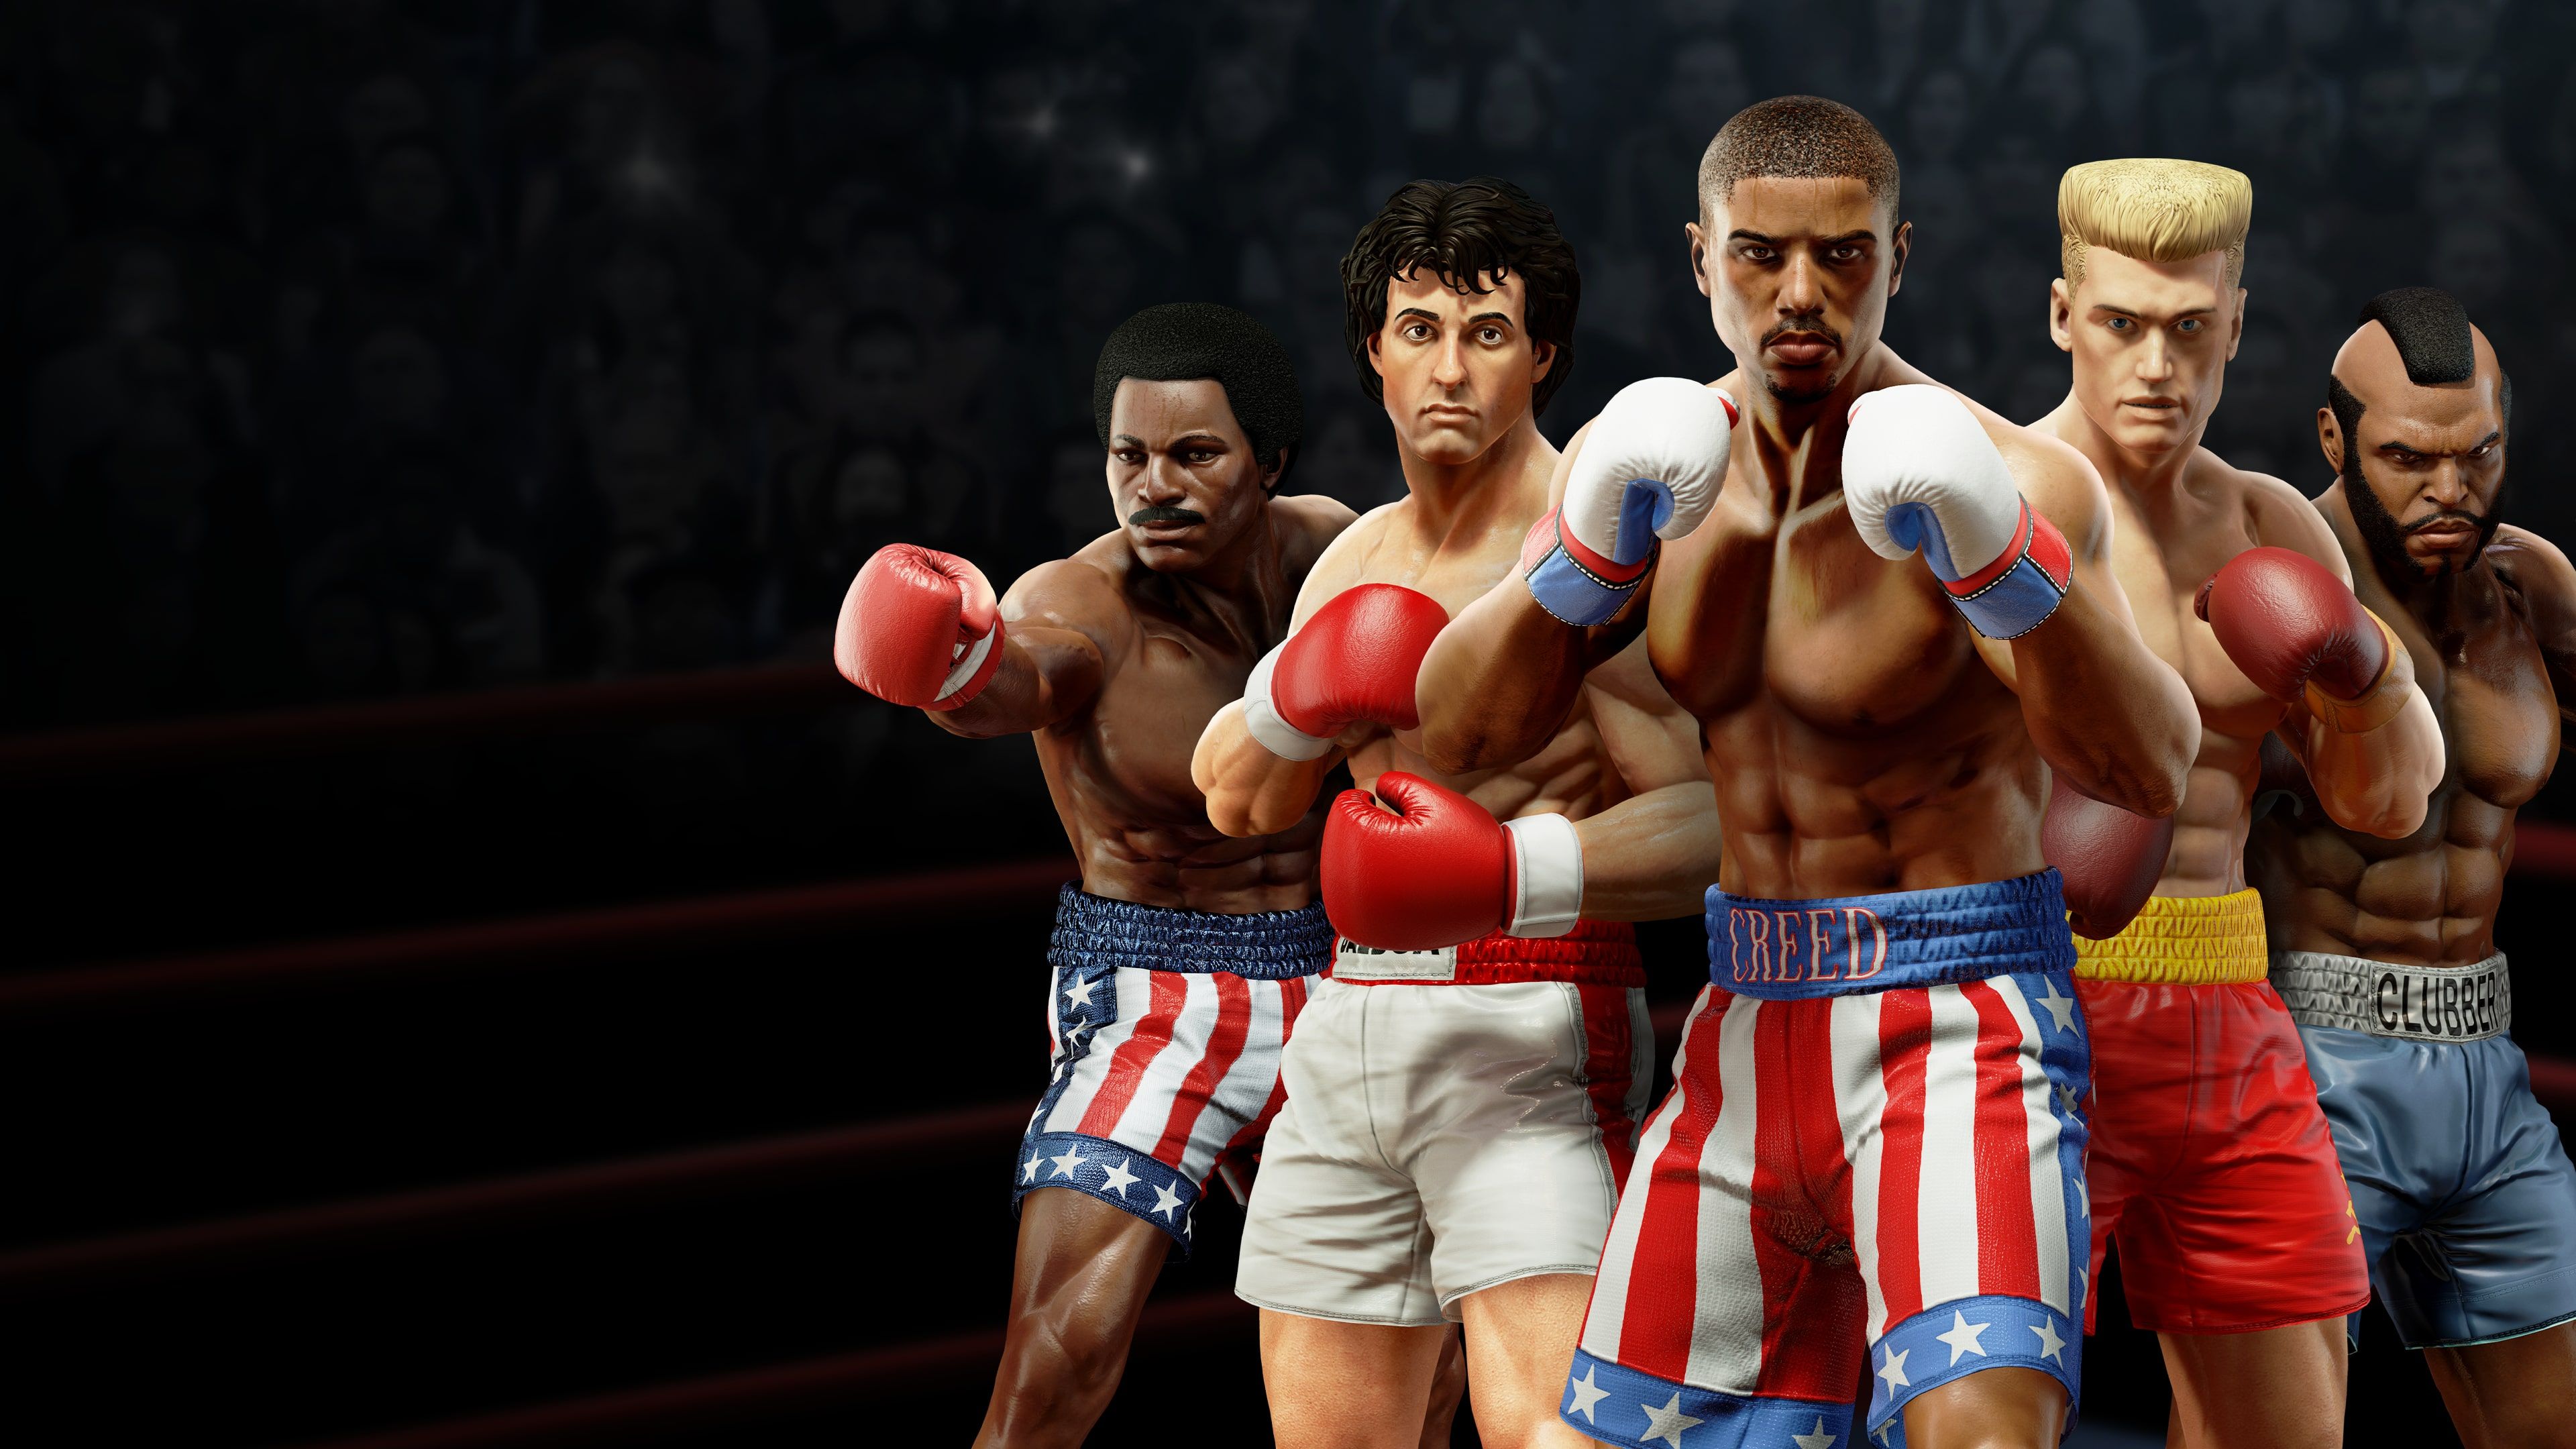 Big Rumble Boxing: Creed Champions cover image